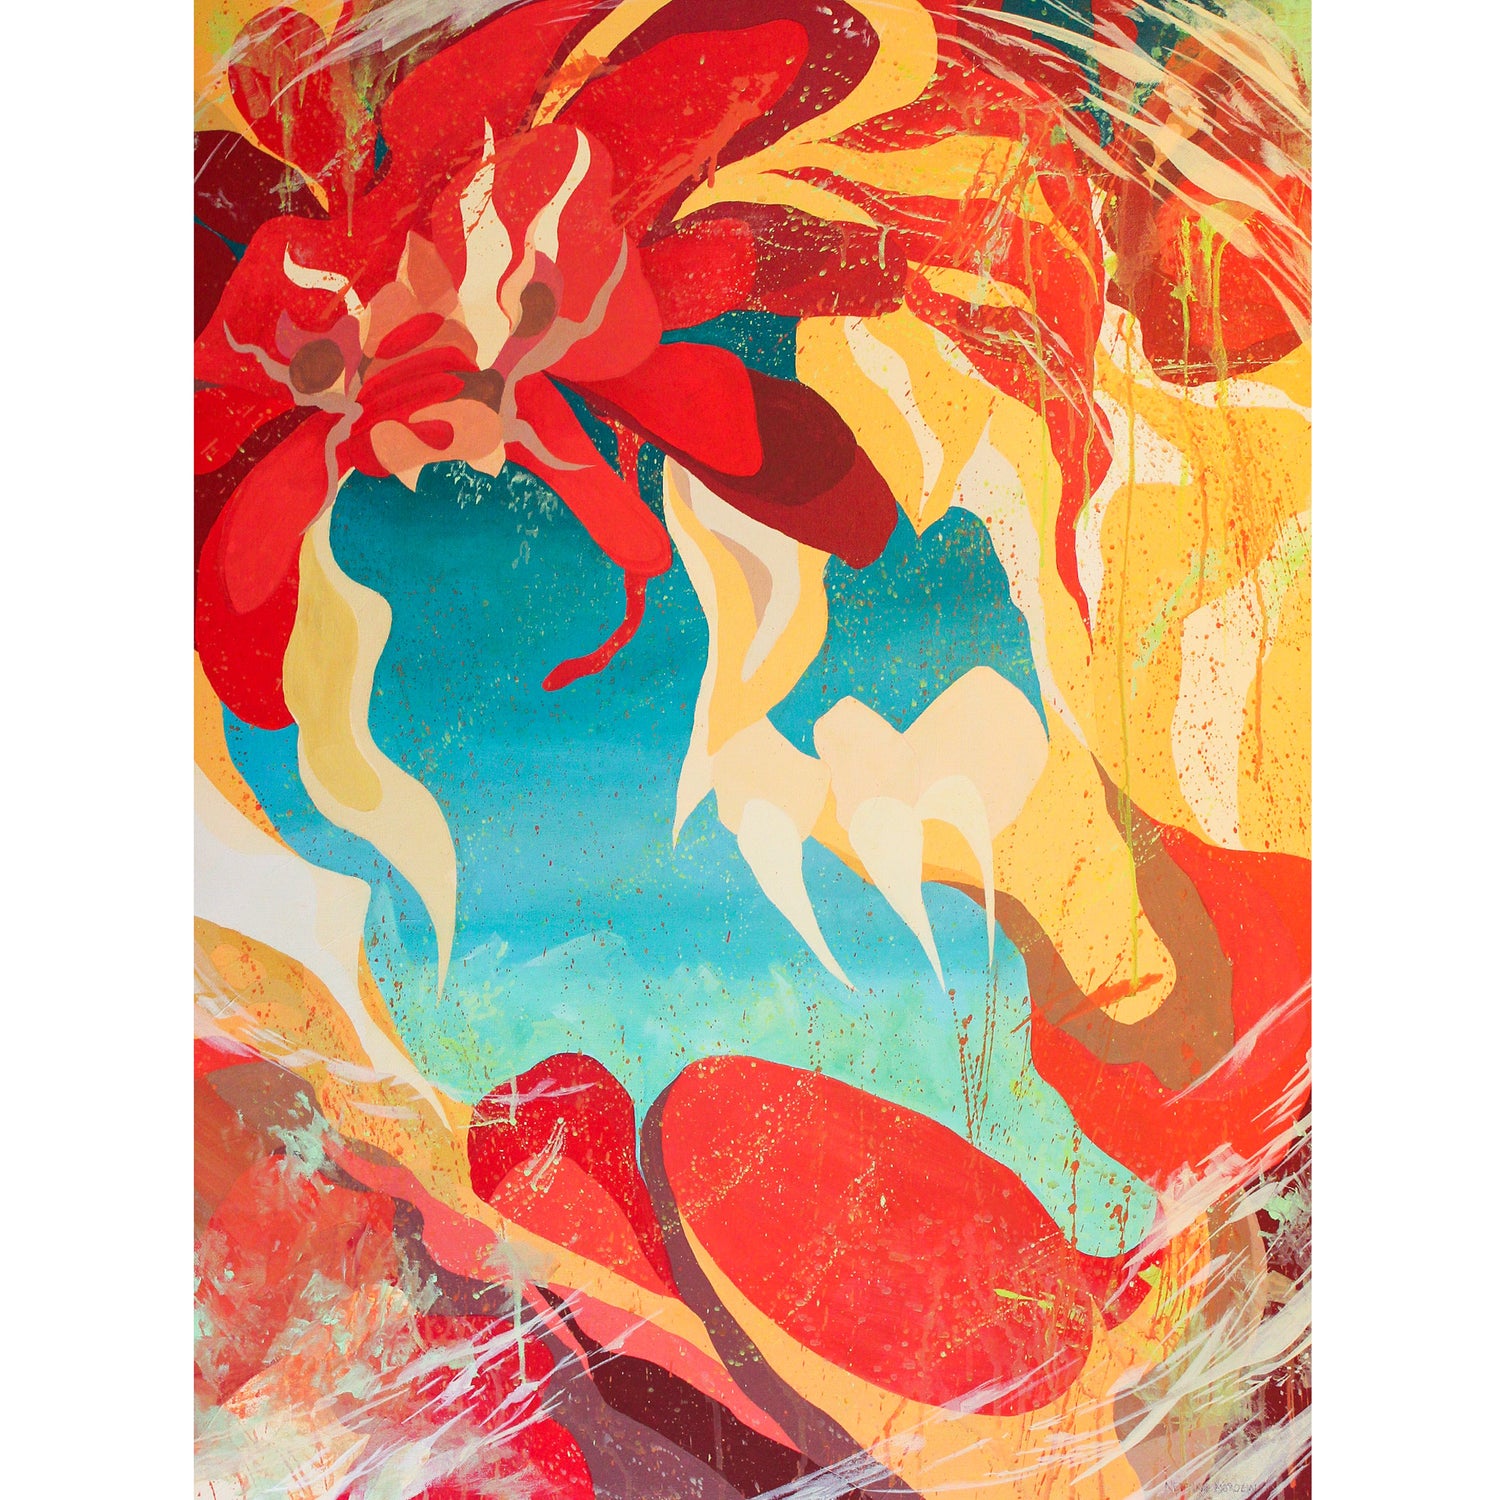 30x40 Large original abstract piece by Nevenka Morozin featuring a red and blue Chimera that symbolizes life's beautiful chaos